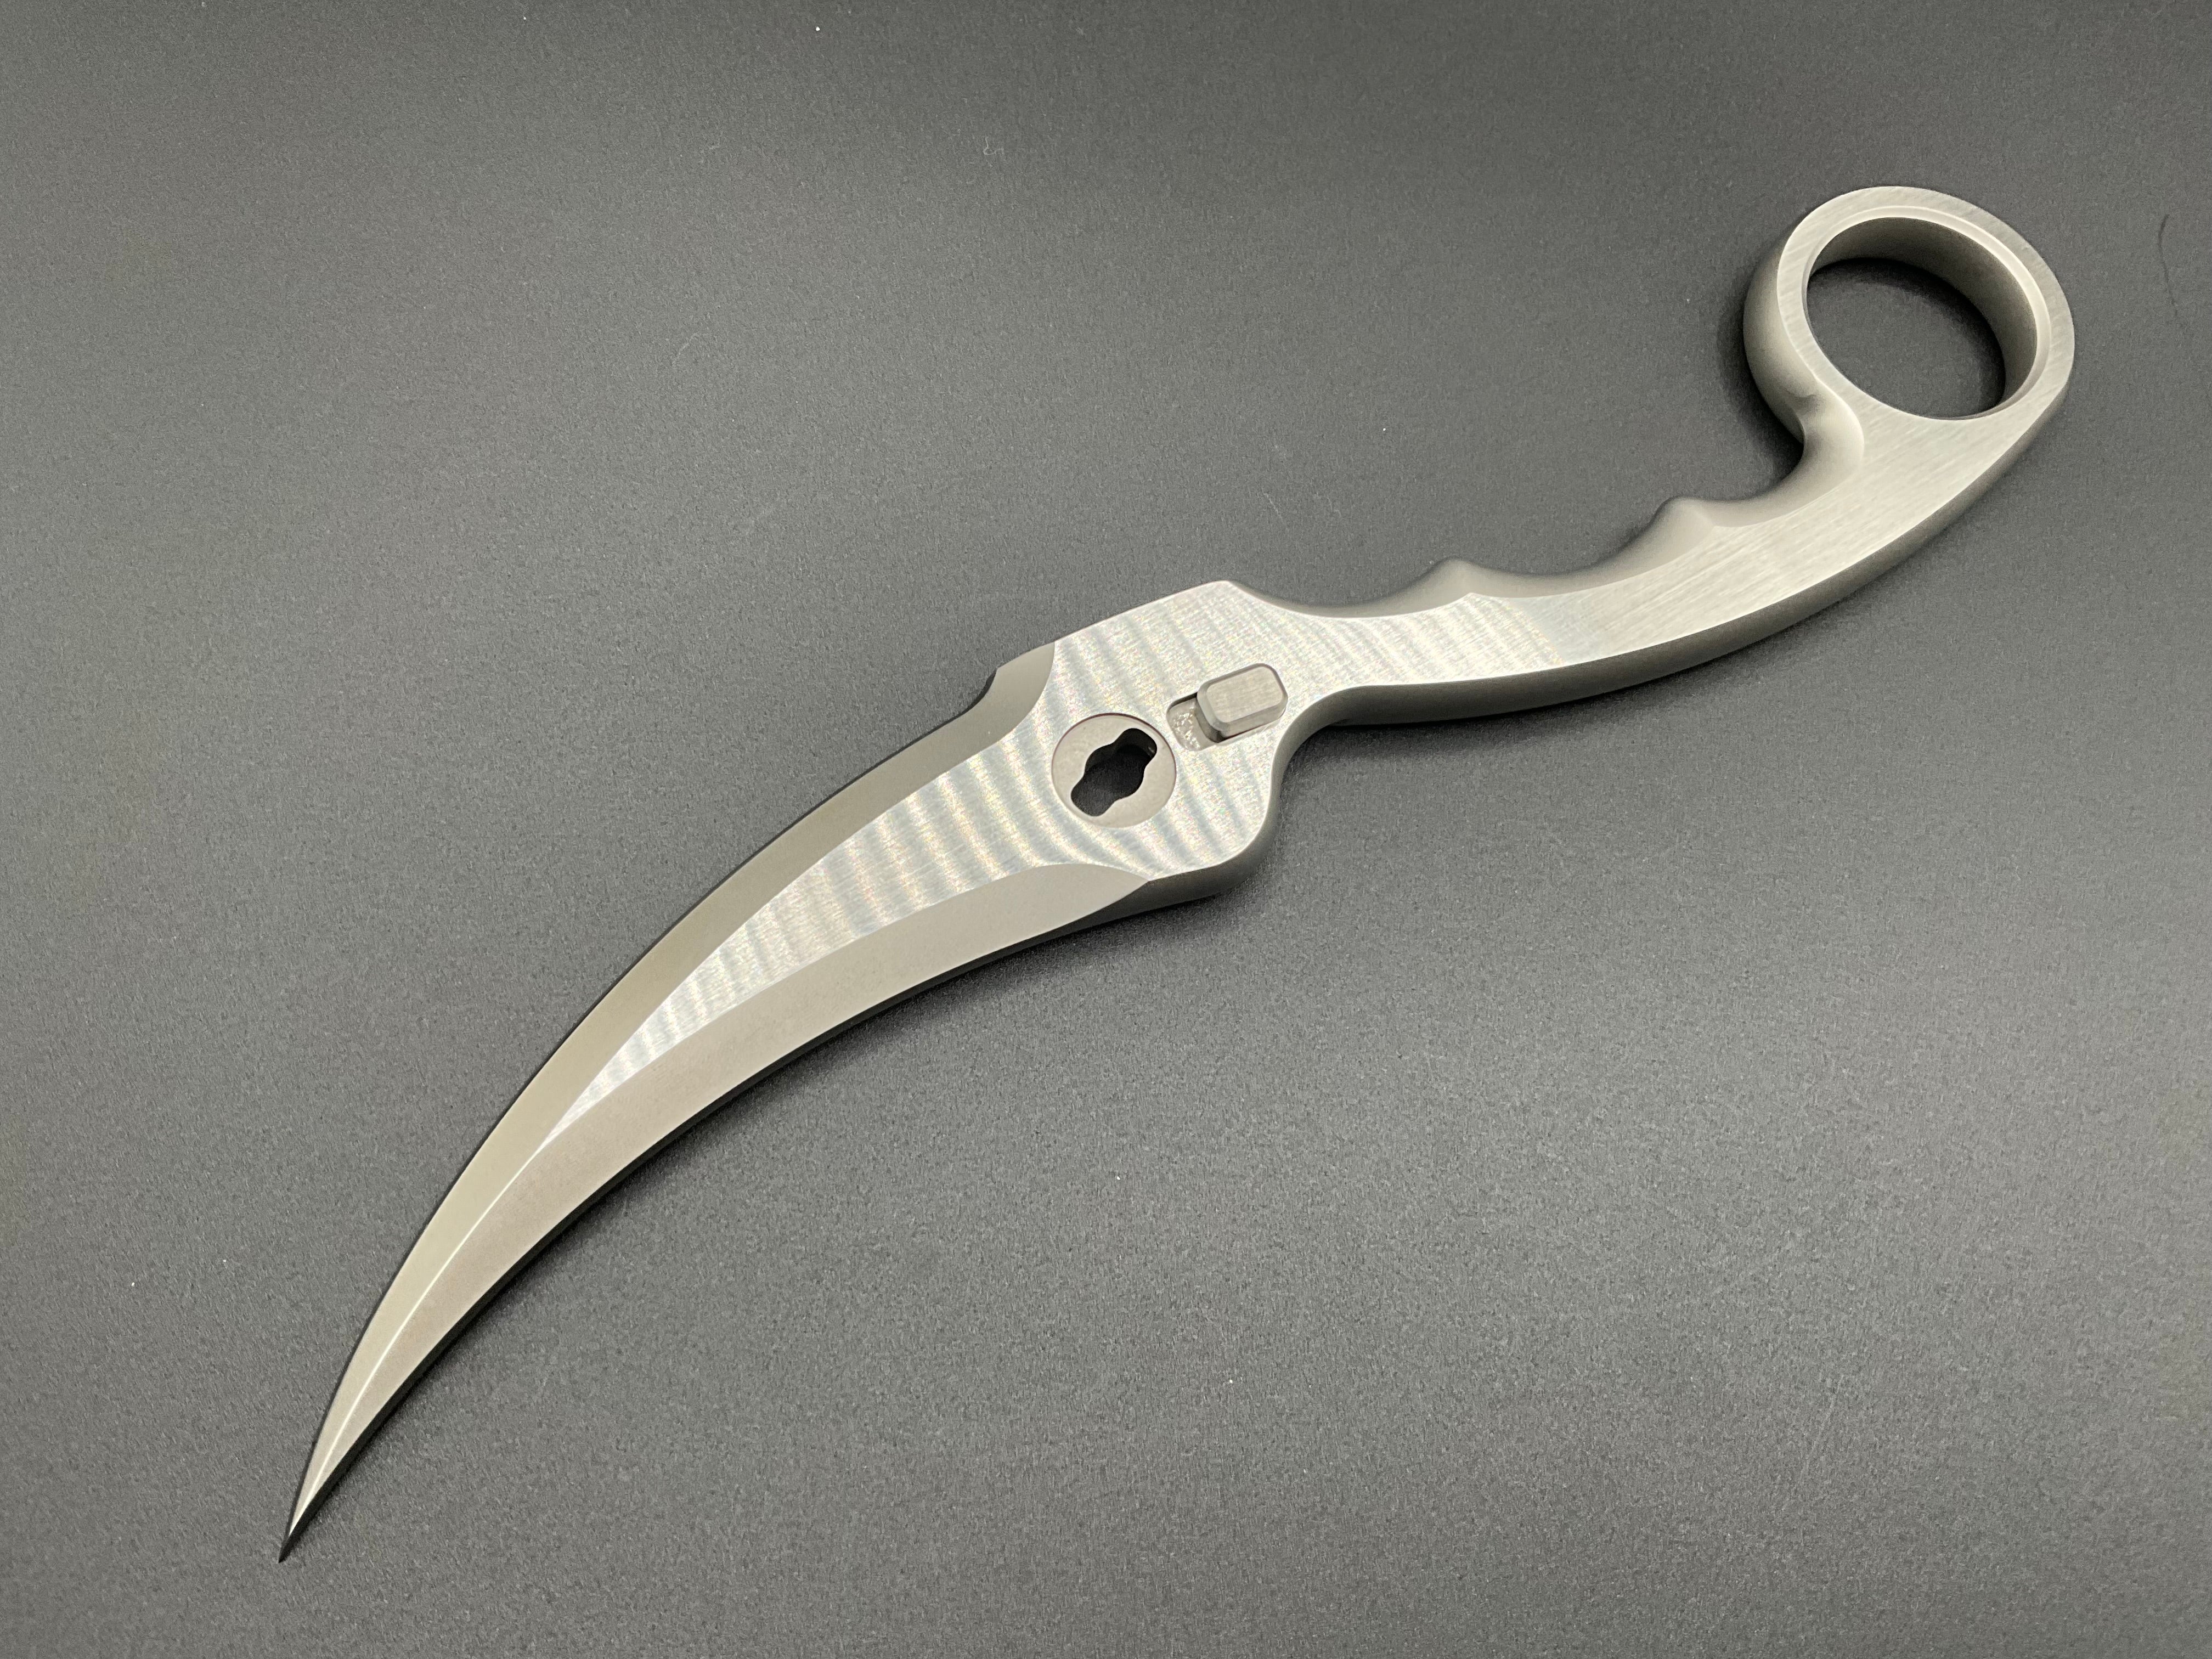 Rike Knife - Tactical Scissors(Improved Version in production)